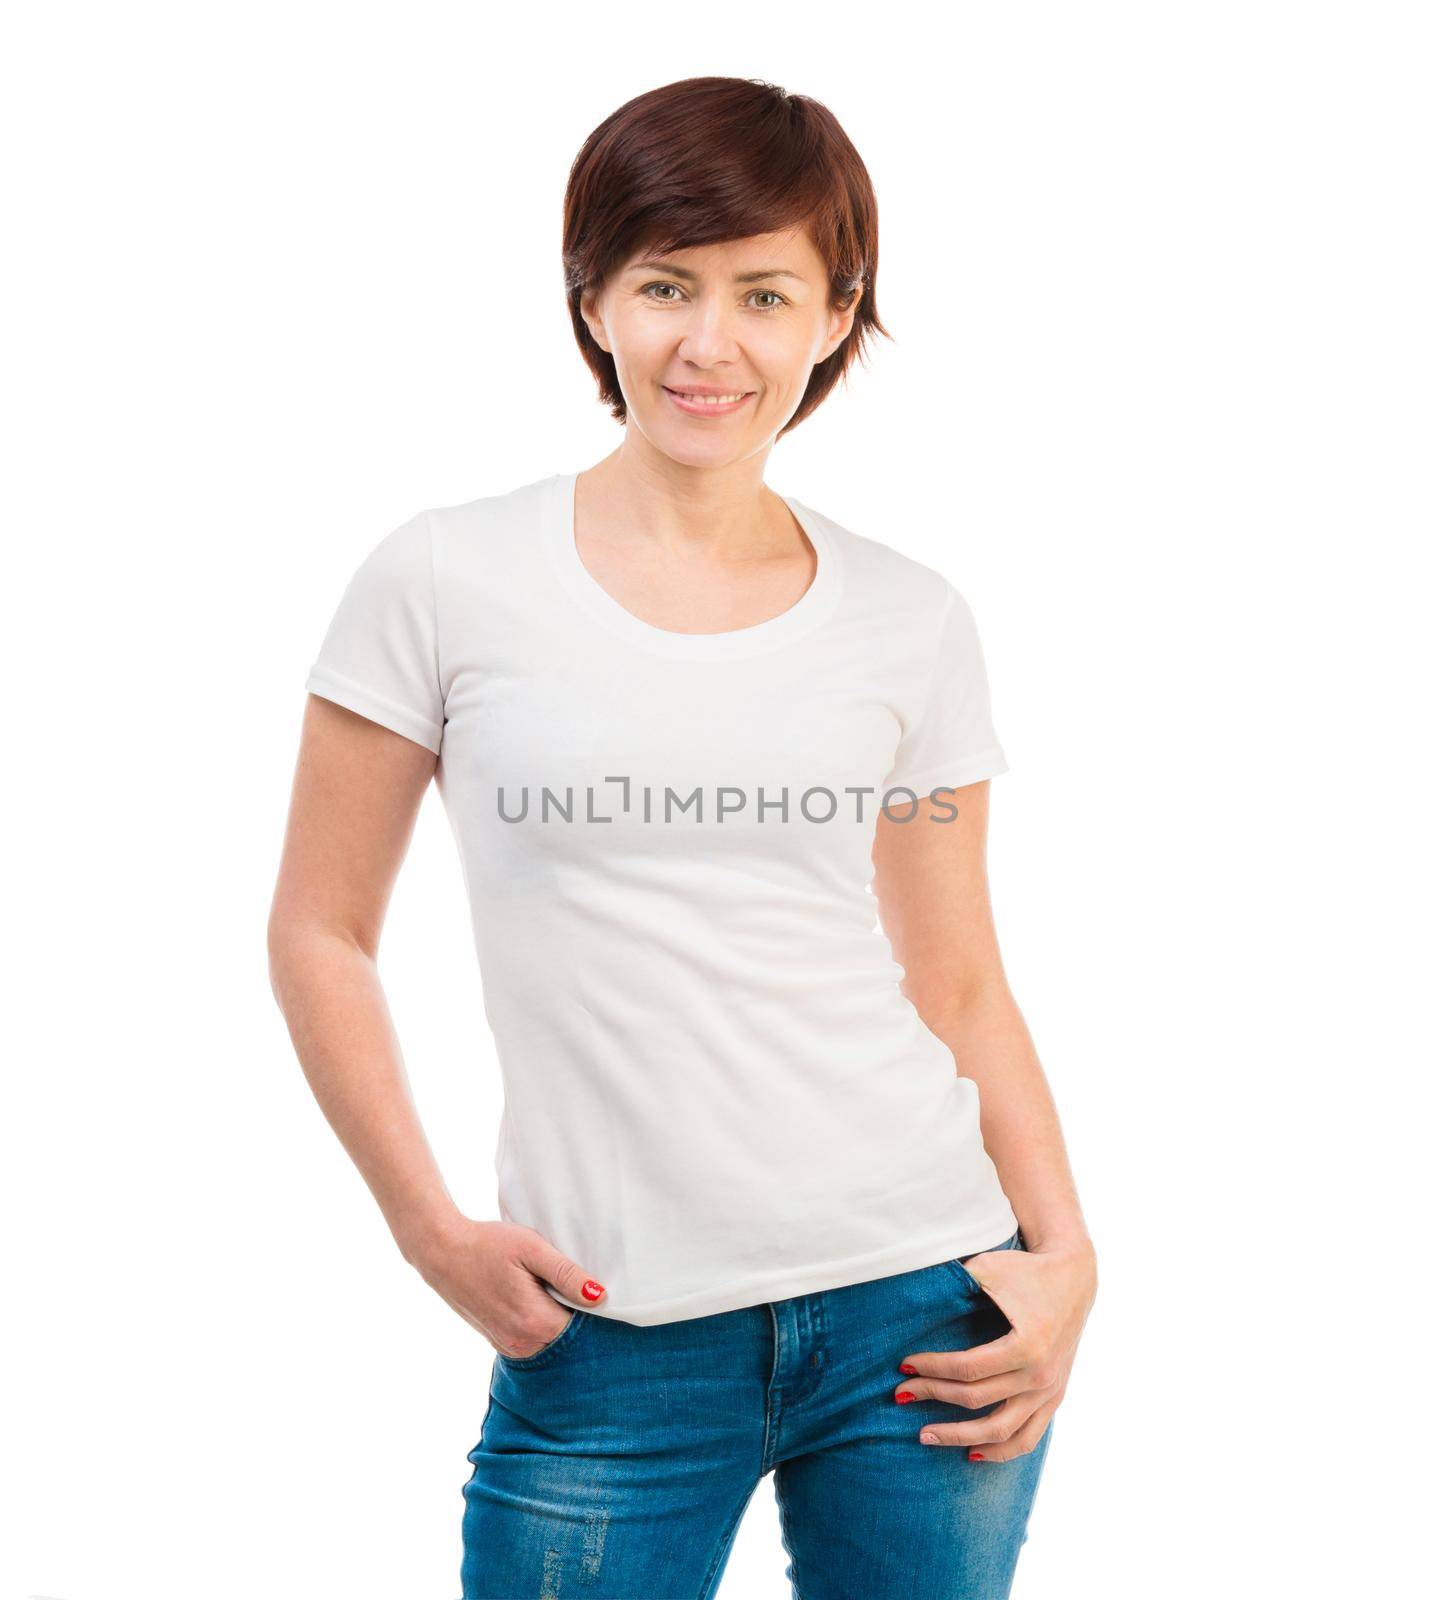 young dark-haired woman in a white T-shirt and blue jeans on a white background